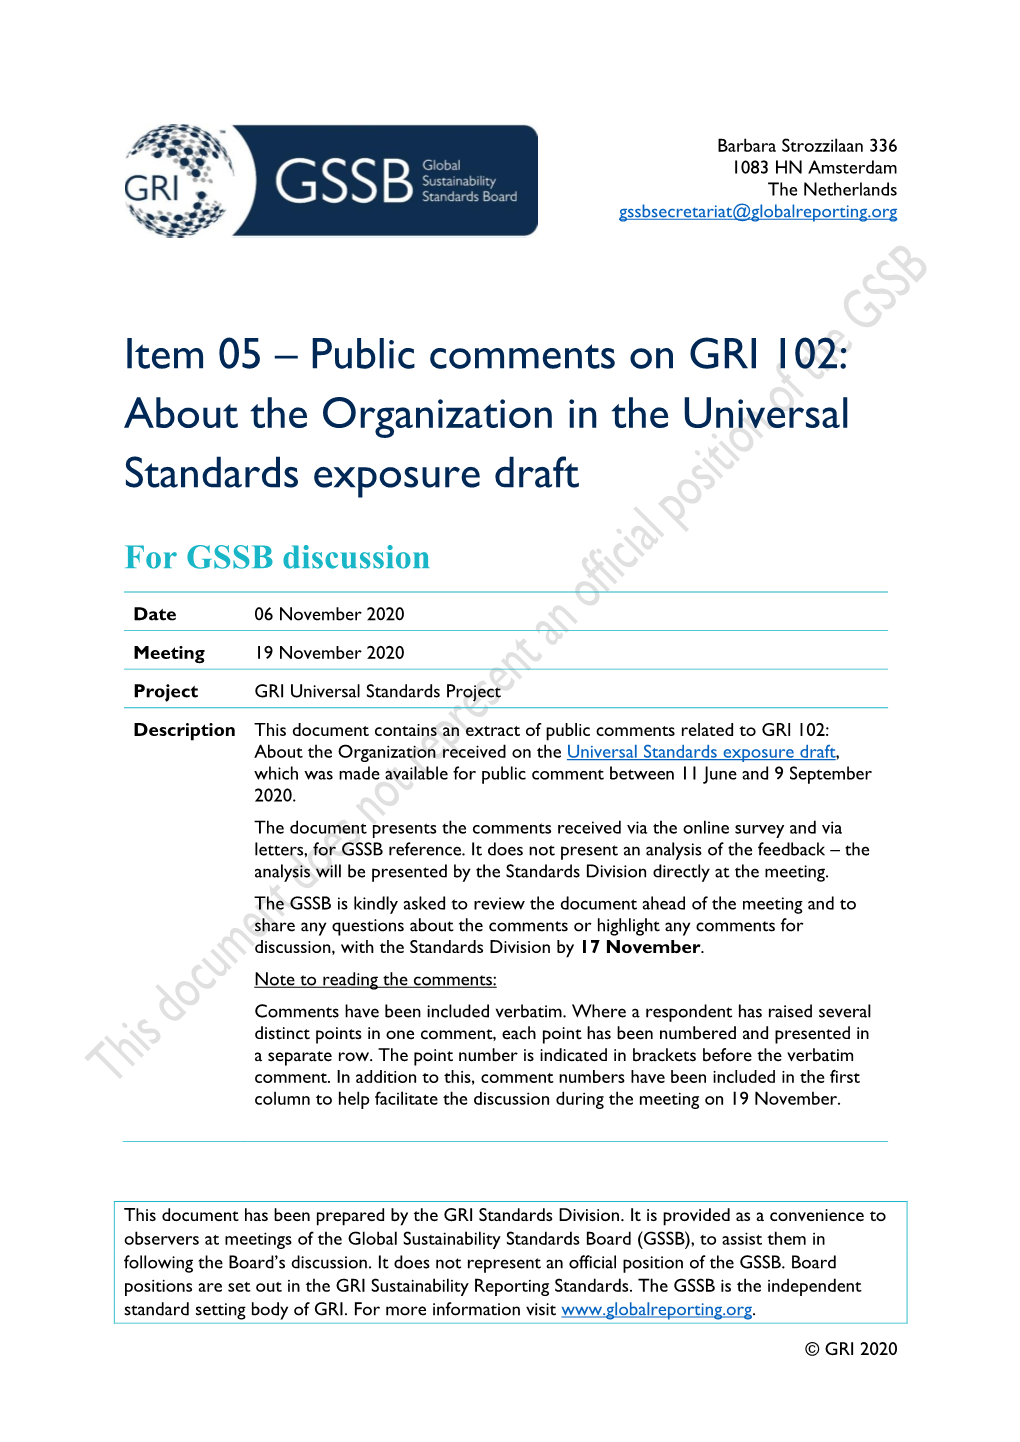 Item 05 – Public Comments on GRI 102: About the Organization in the Universal Standards Exposure Draft